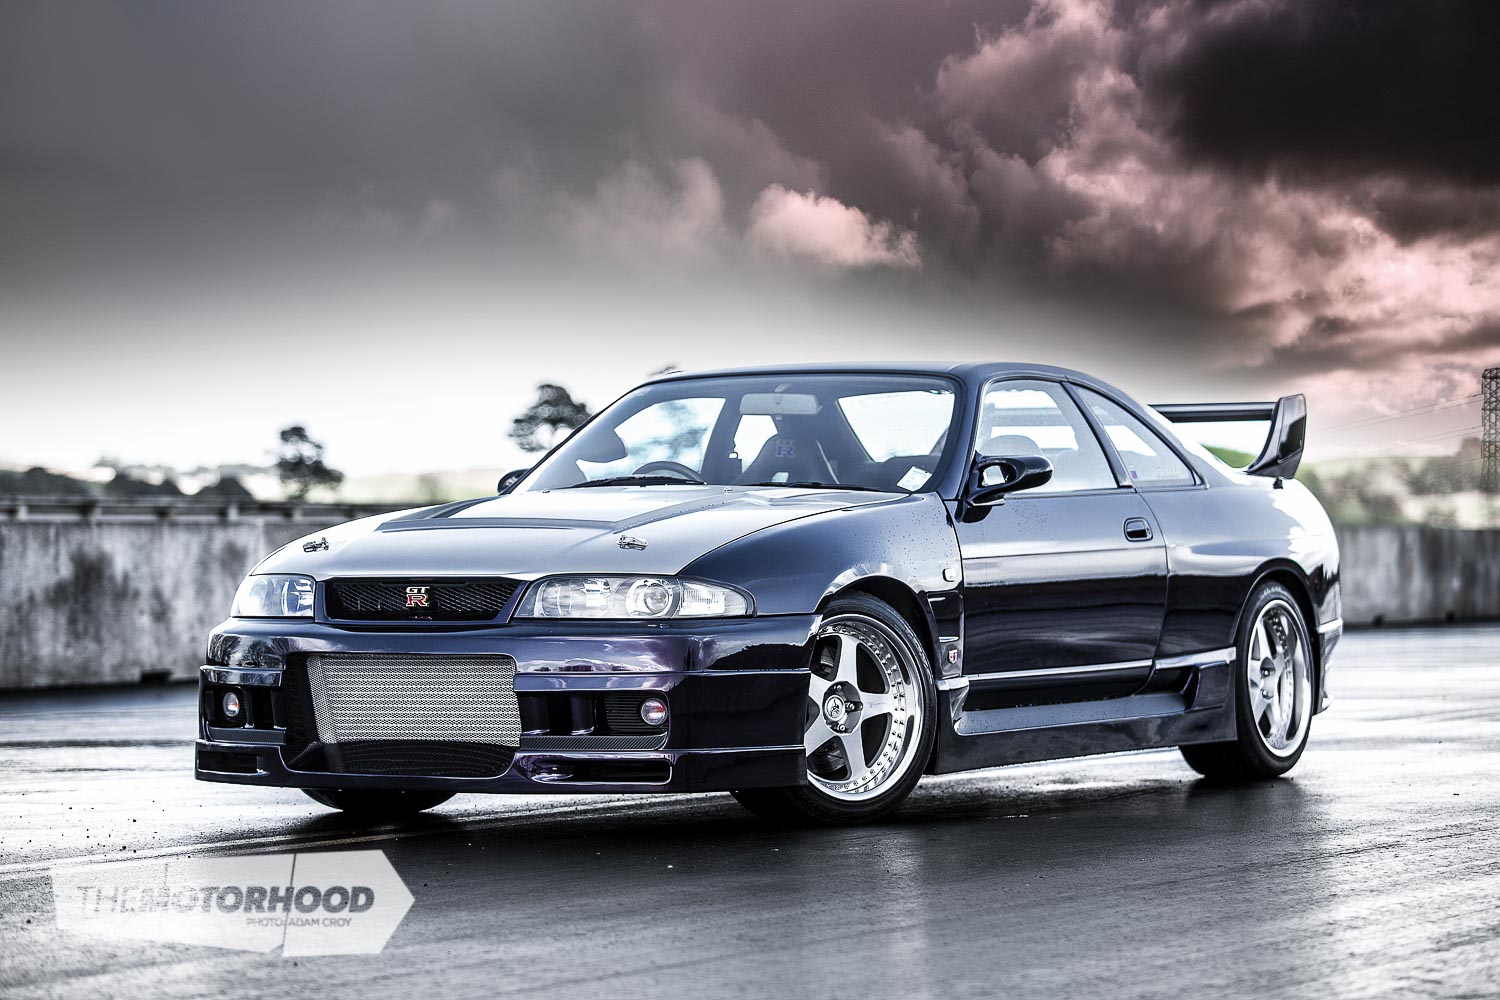 Mark’s R33 GT-R body appears factory, but upon further inspection you’ll notice everything is much larger and more aggressive. This is thanks to the Trust body kit, GRacer under panel, carbon-fibre rear wing, Top Secret bonnet, and Nismo guards